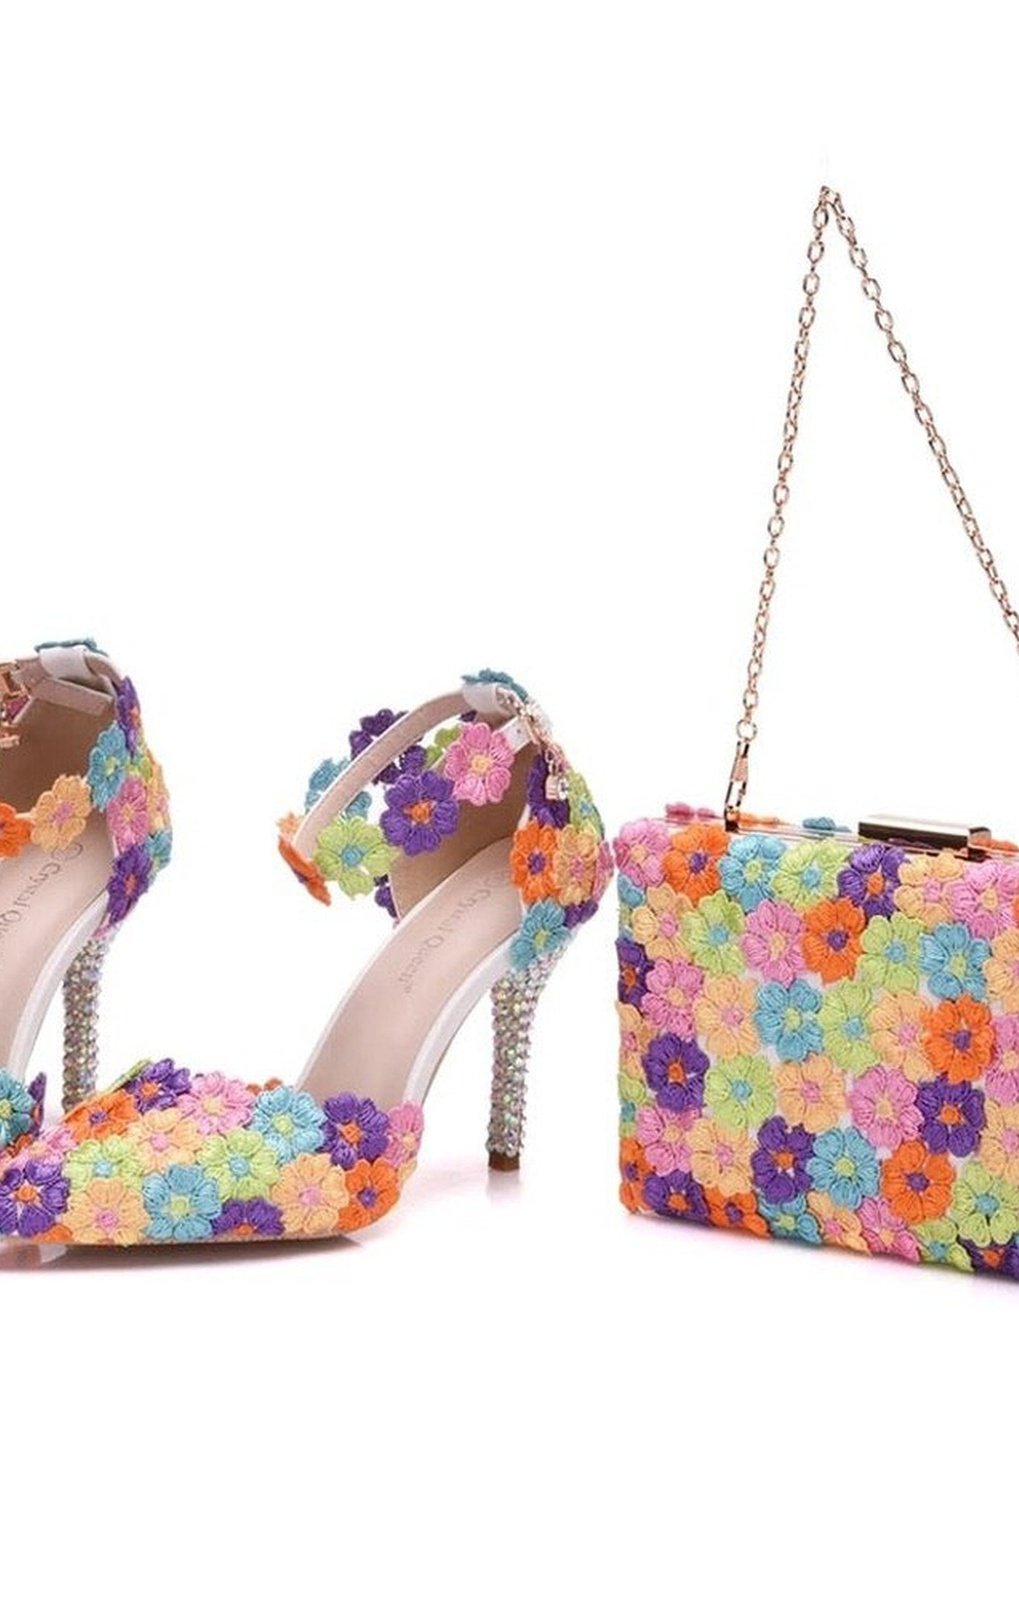 Multicolored Floral  Shoes Matching bags Clutches 9CM High Heels